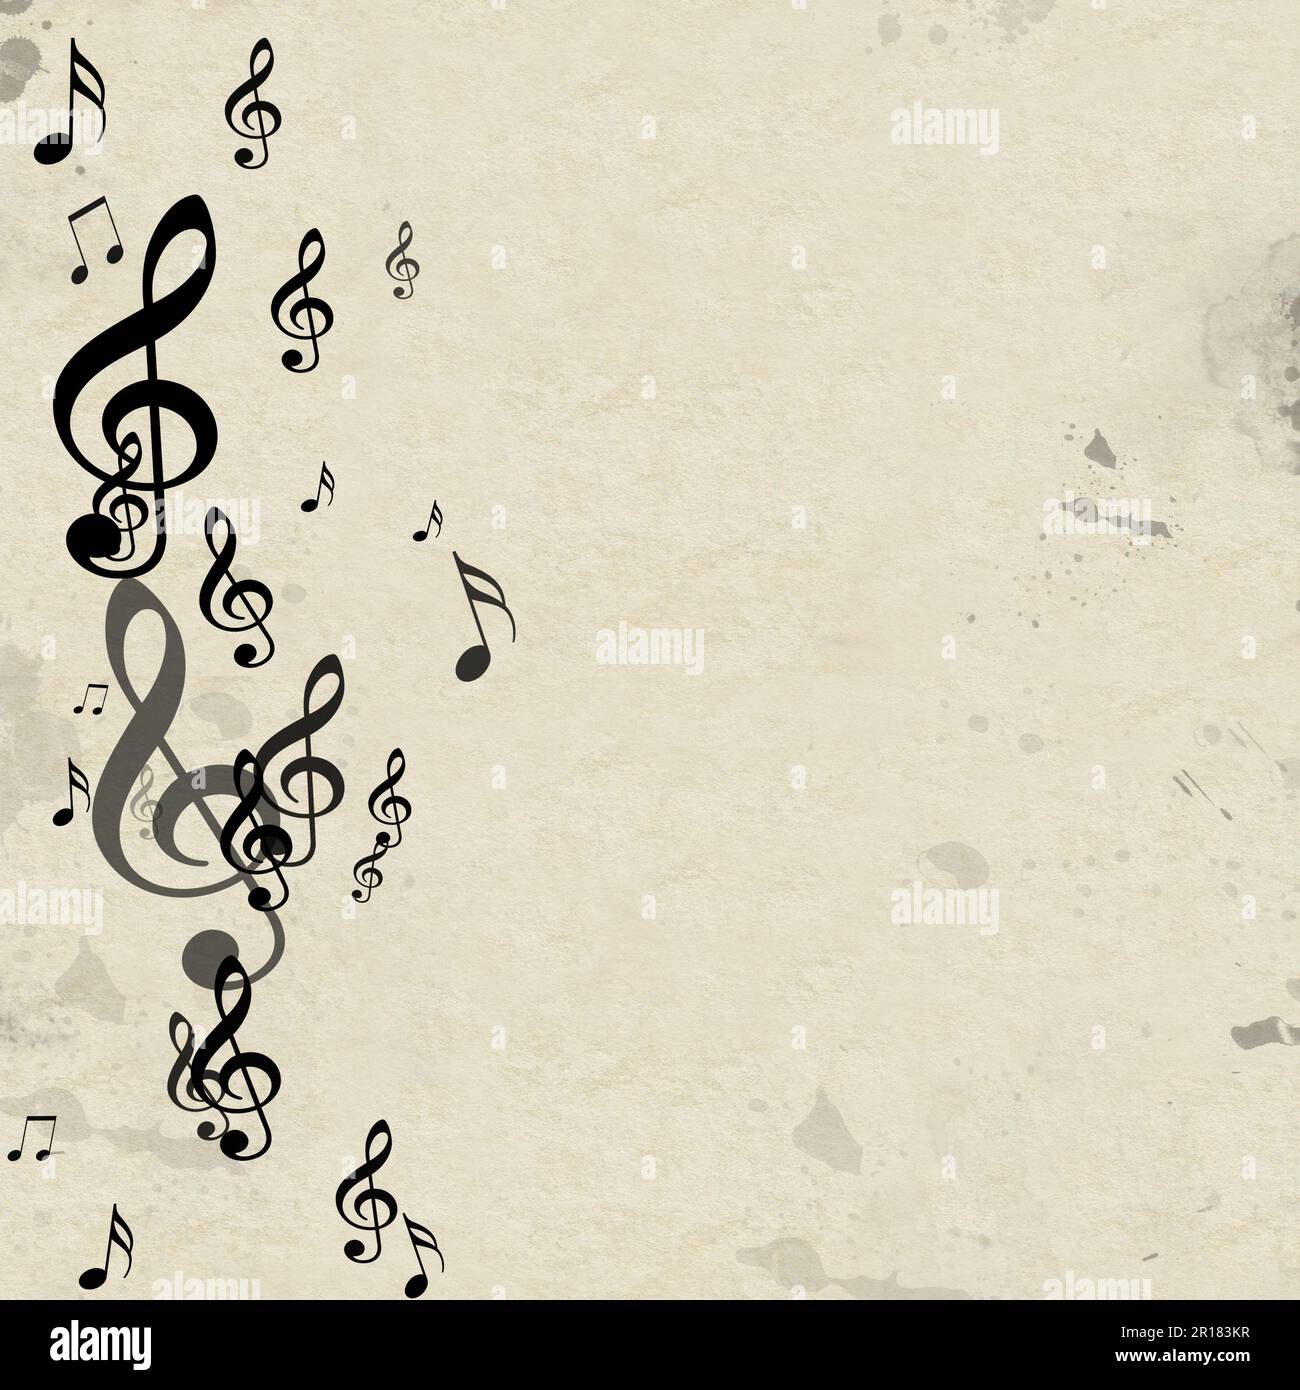 cool classical music wallpapers